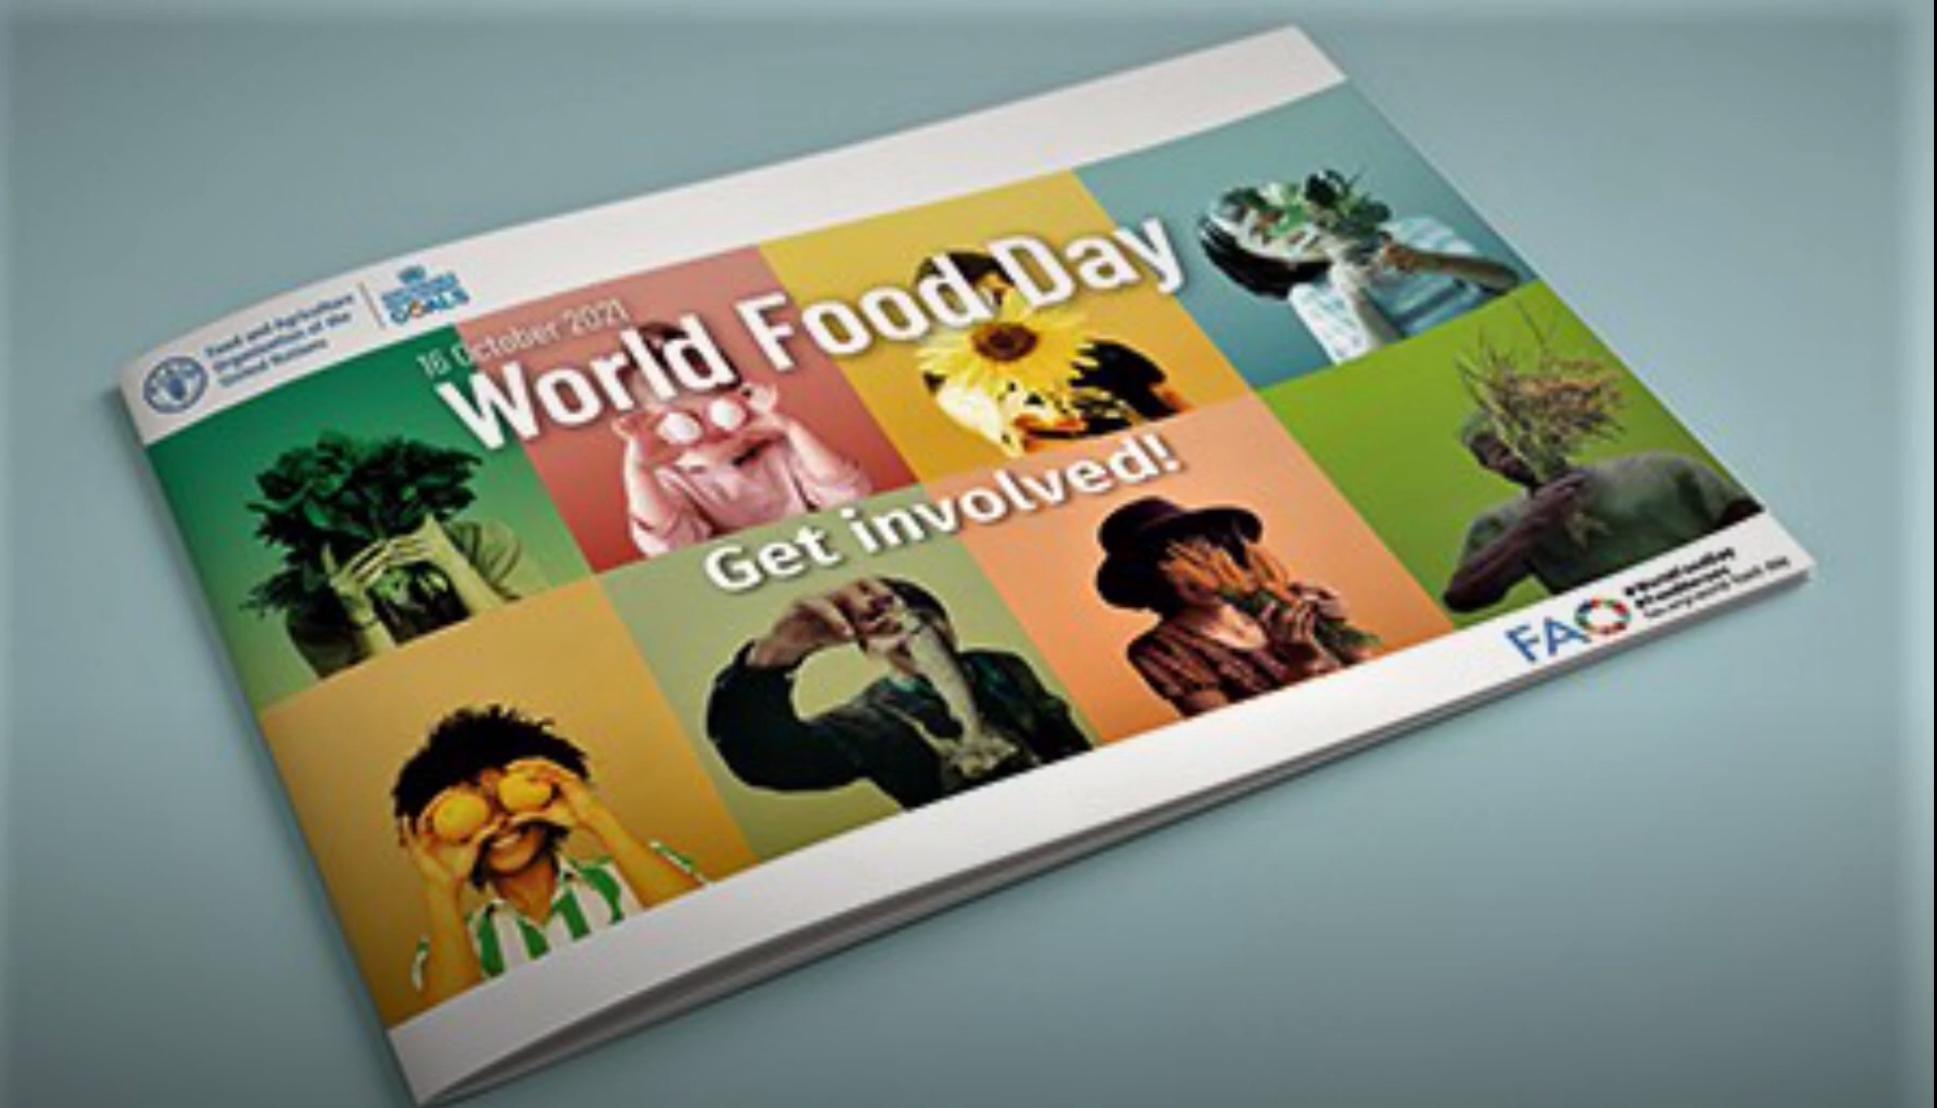 M.T.O. Albuquerque Presents at the Interfaith Hunger Coalition's World Food Day